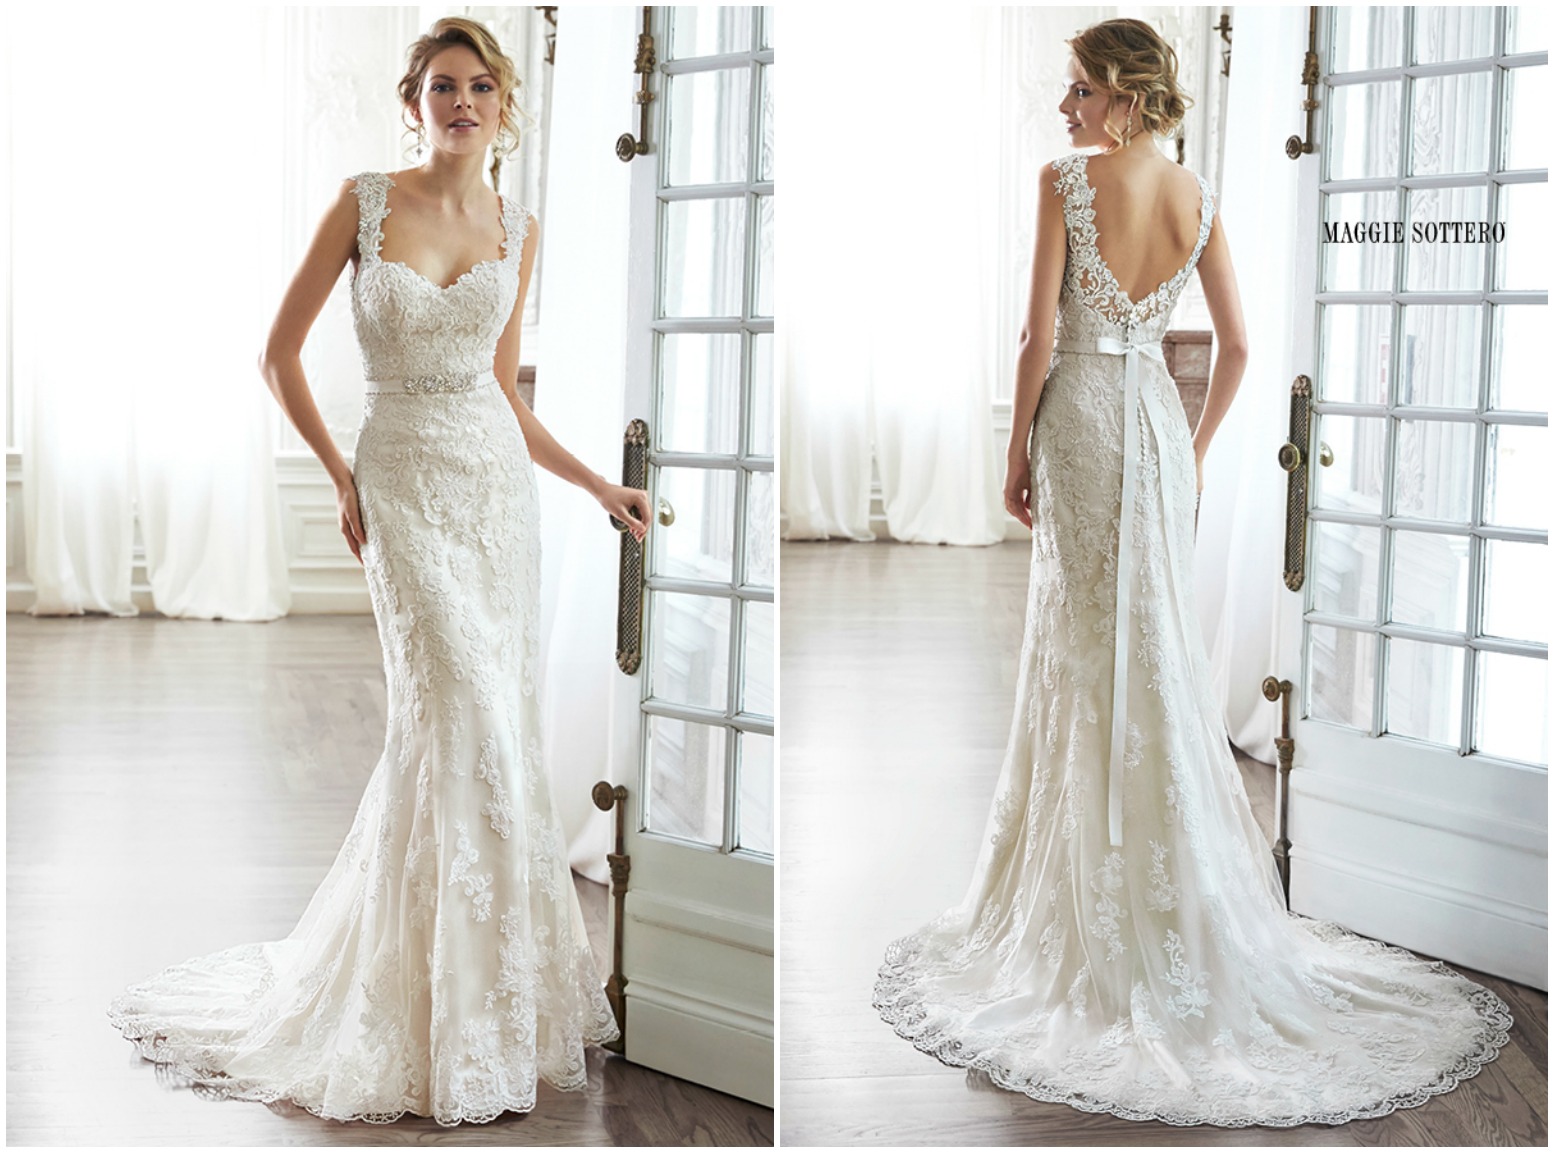 <a href="http://www.maggiesottero.com/dress.aspx?style=5MN083&amp;page=0&amp;pageSize=36&amp;keywordText=&amp;keywordType=All" target="_blank">Maggie Sottero</a>